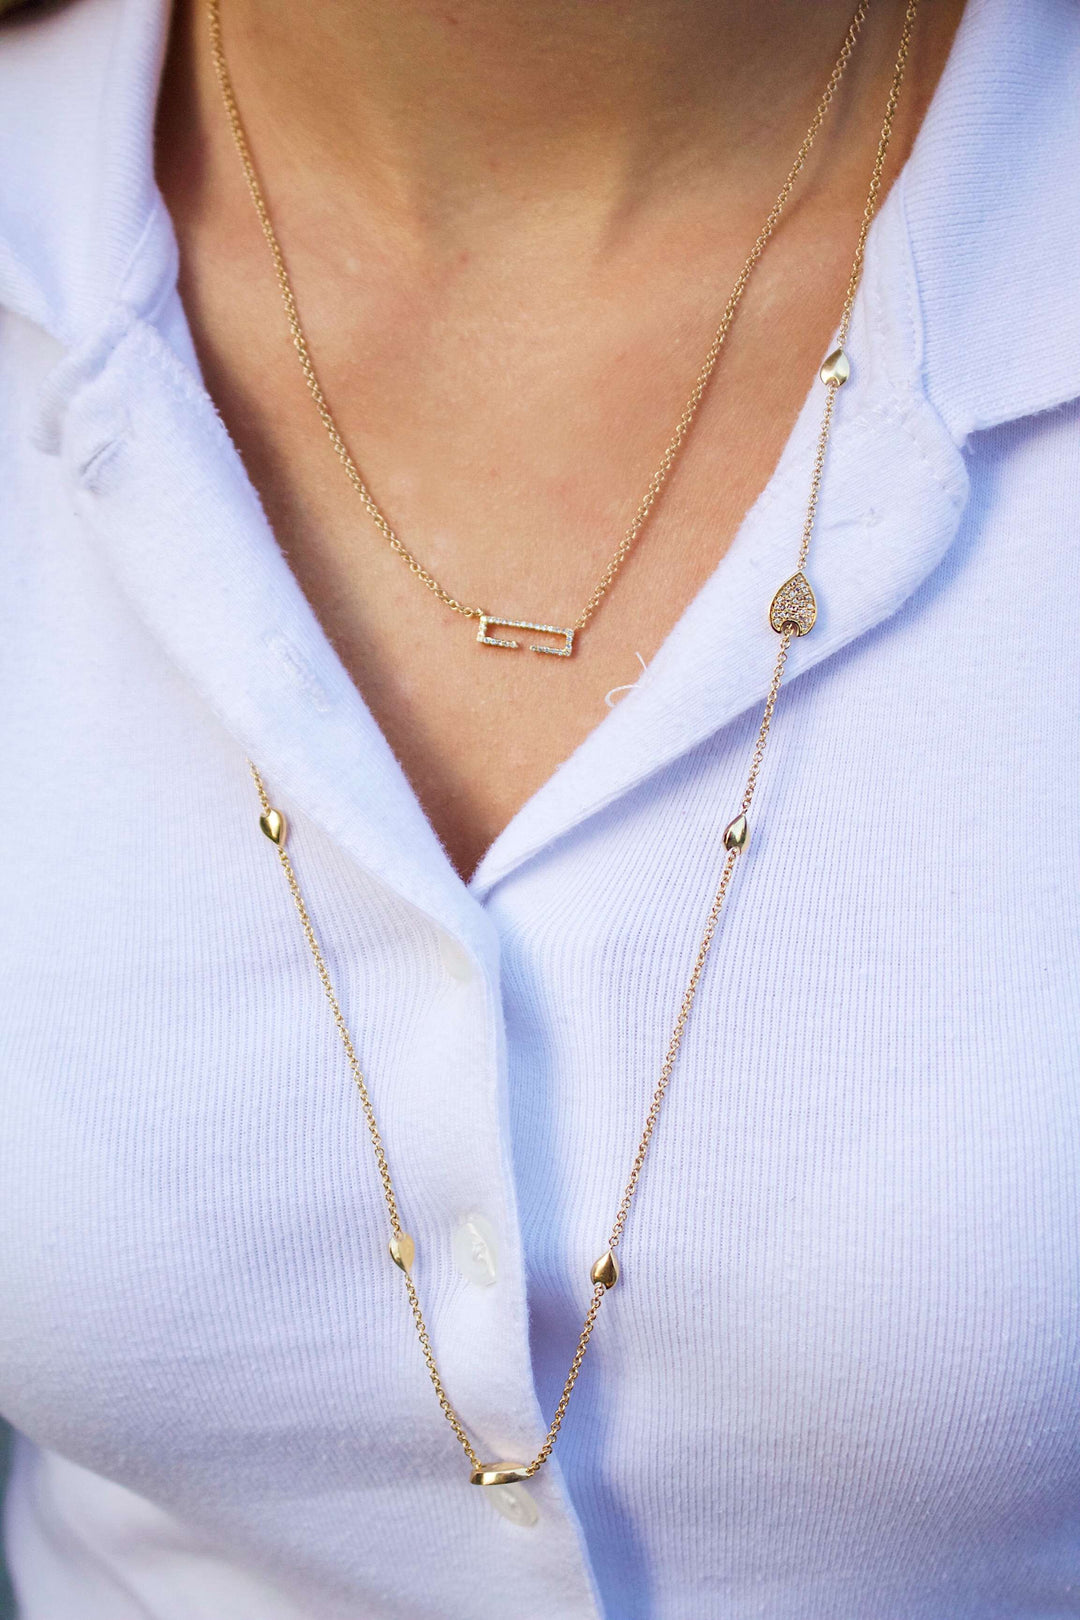 Swing Rectangle Diamond Necklace in 14K Yellow Gold Vermeil on Sterling Silver